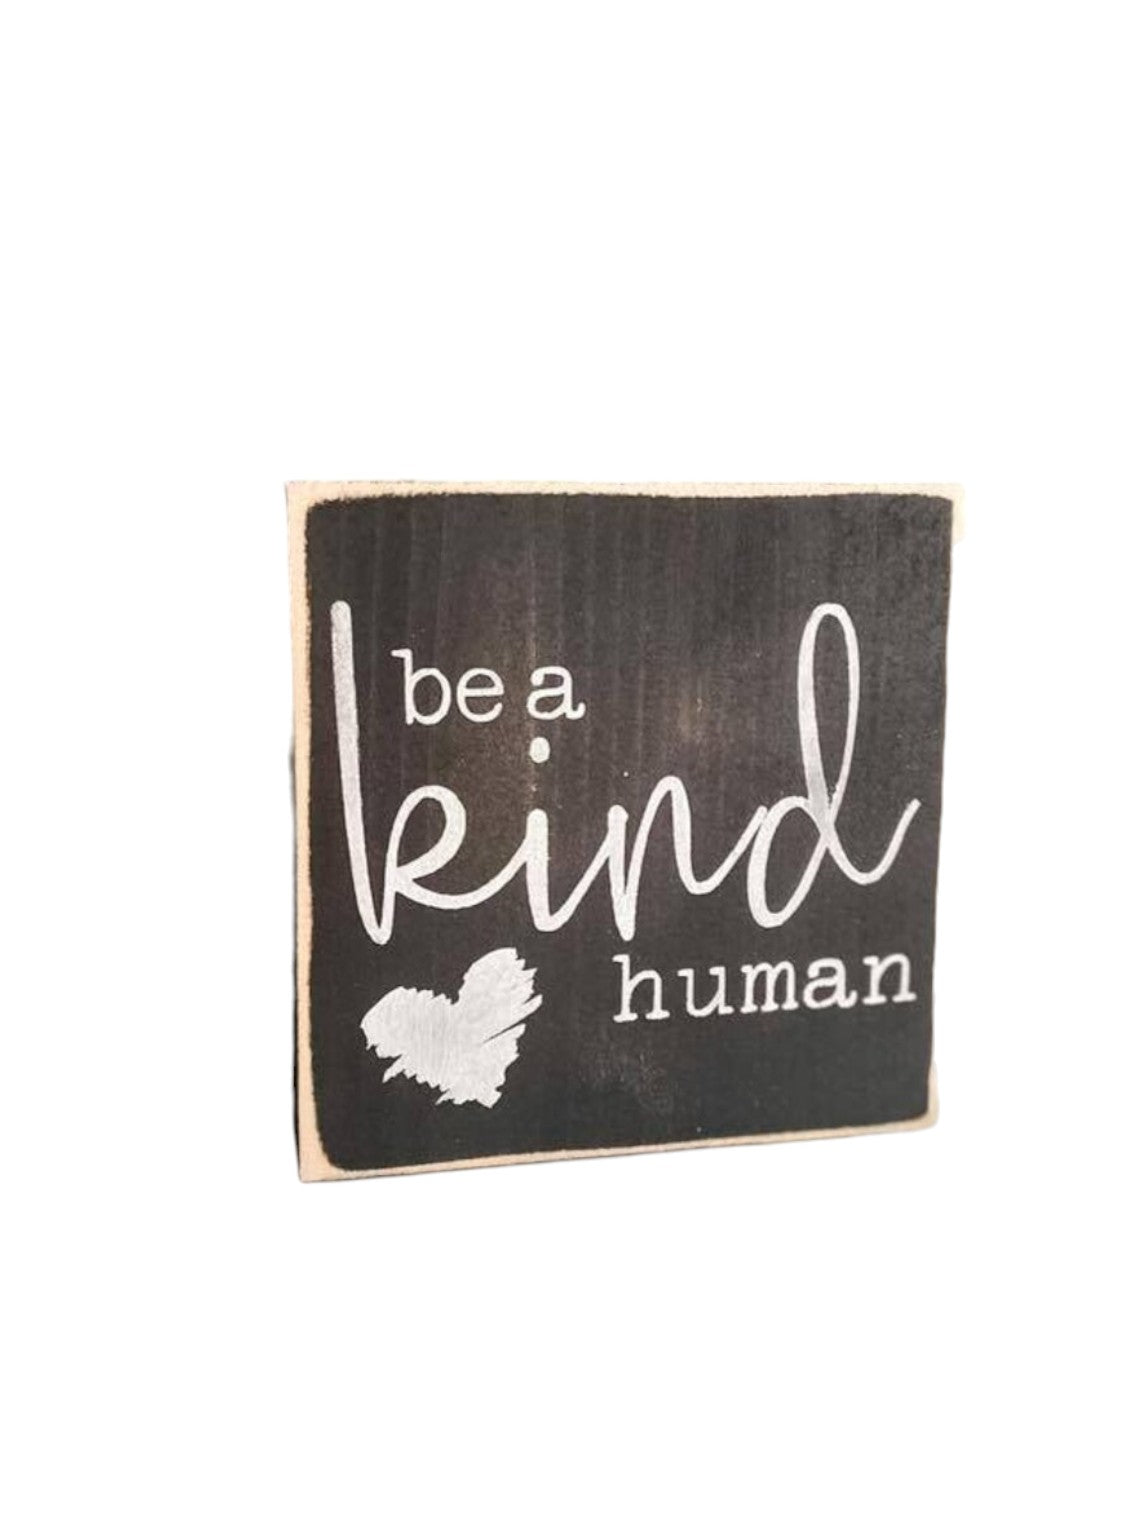 Be A Kind Human" wooden block sign with black background and white text, featuring a heart icon. Ideal for office desk decor or shelf display